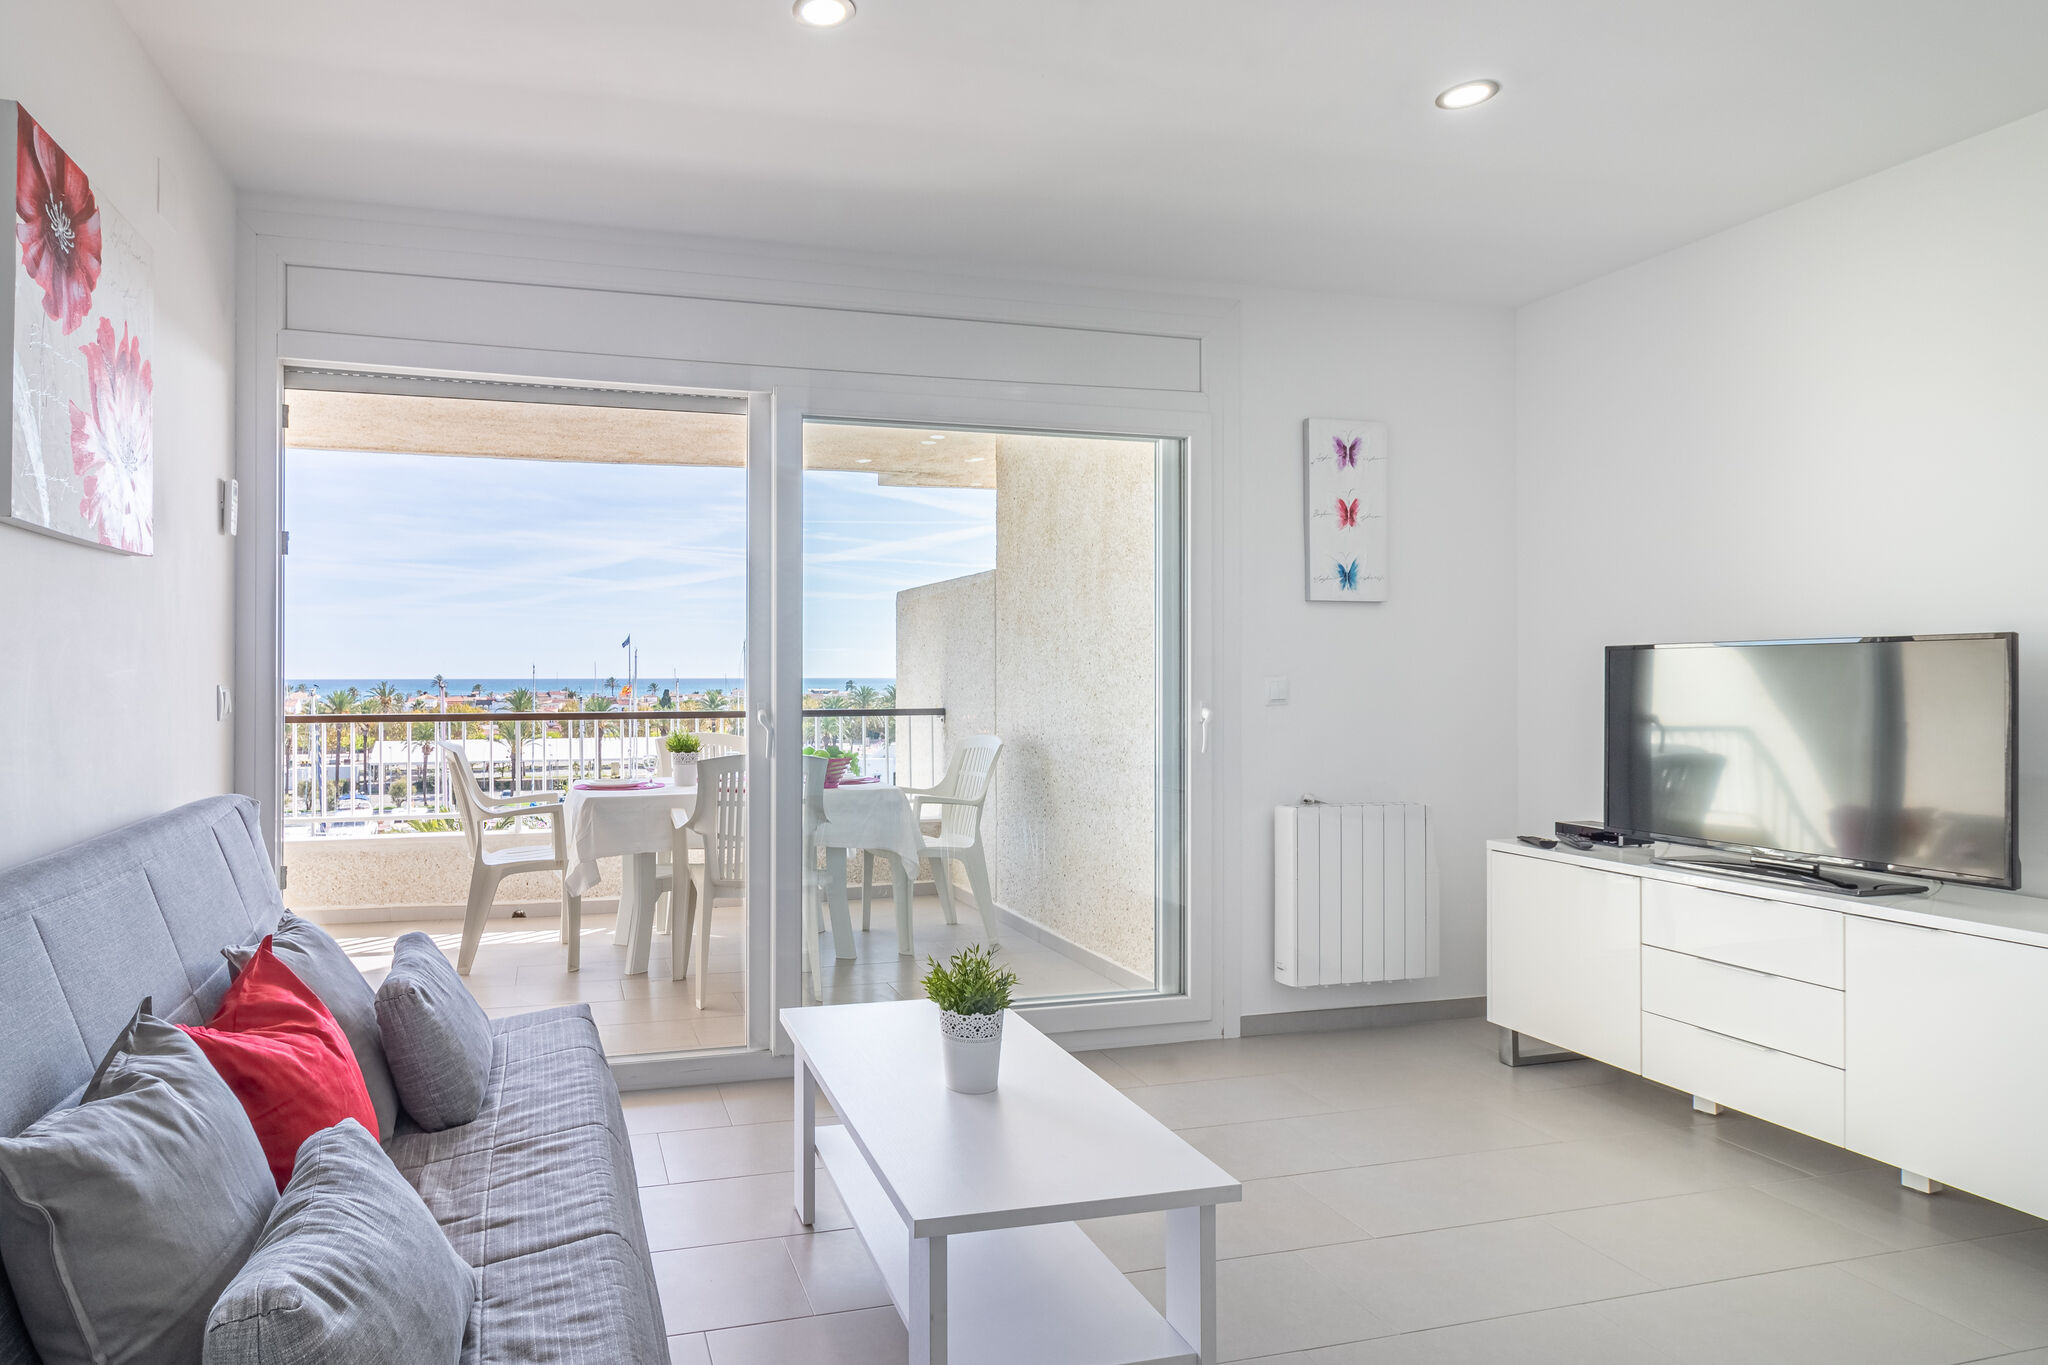 Apartment overlooking the sea and the port of Empuriabrava